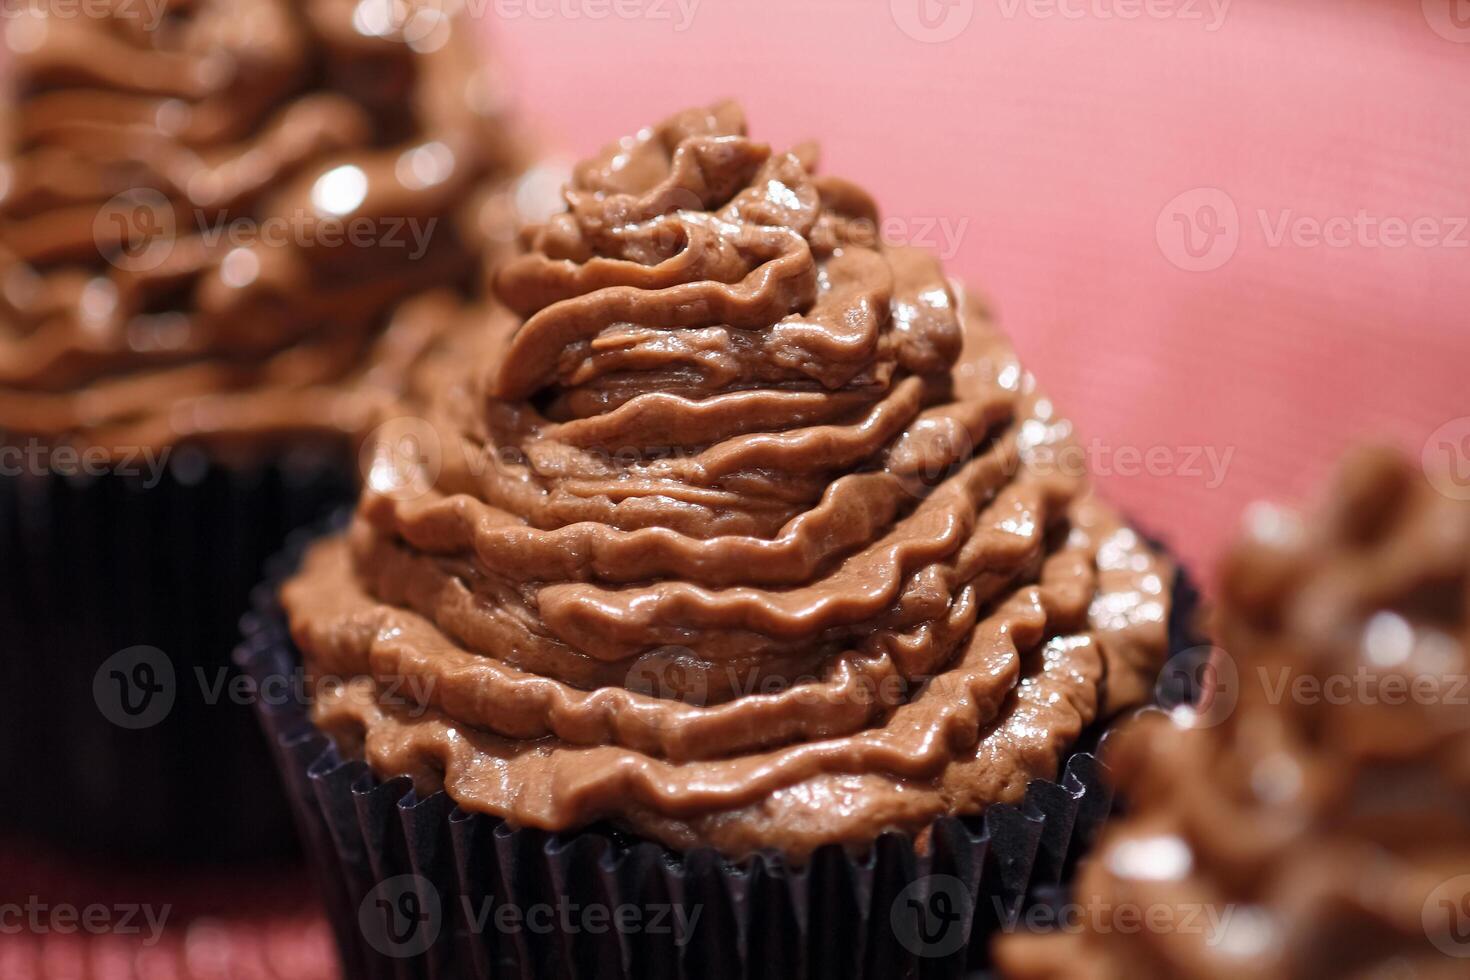 delicious chocolate cupcakes close up photo